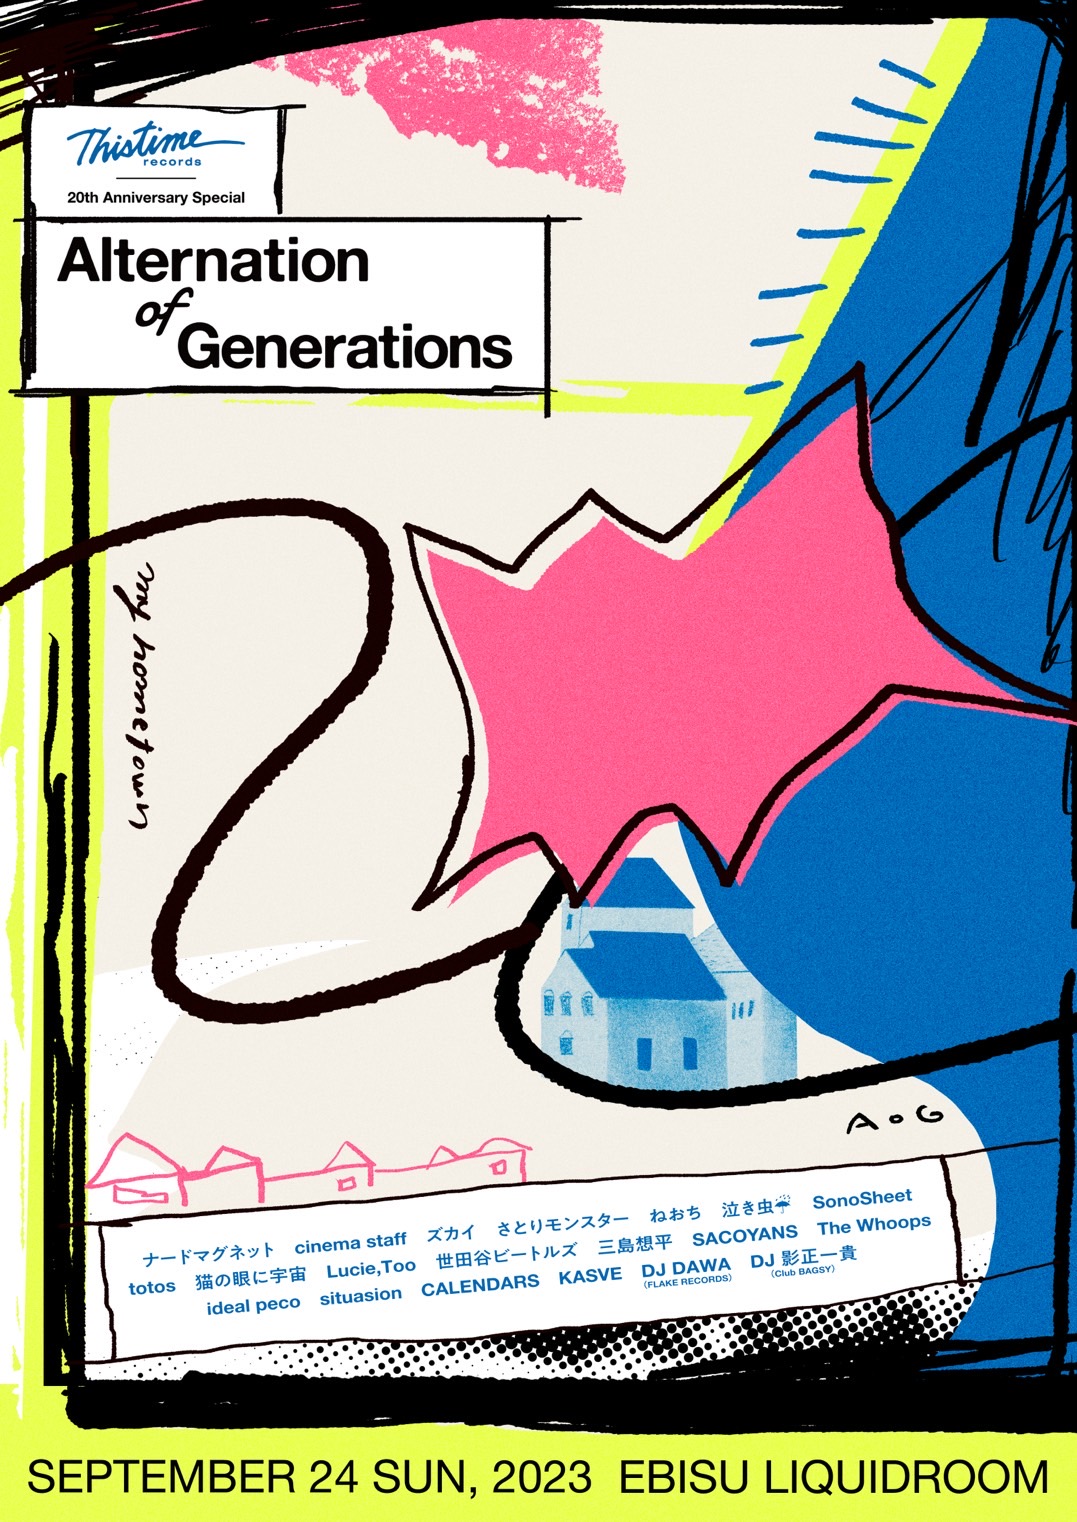 THISTIME RECORDS 20TH Anniversary Special 『Alternation of Generations』